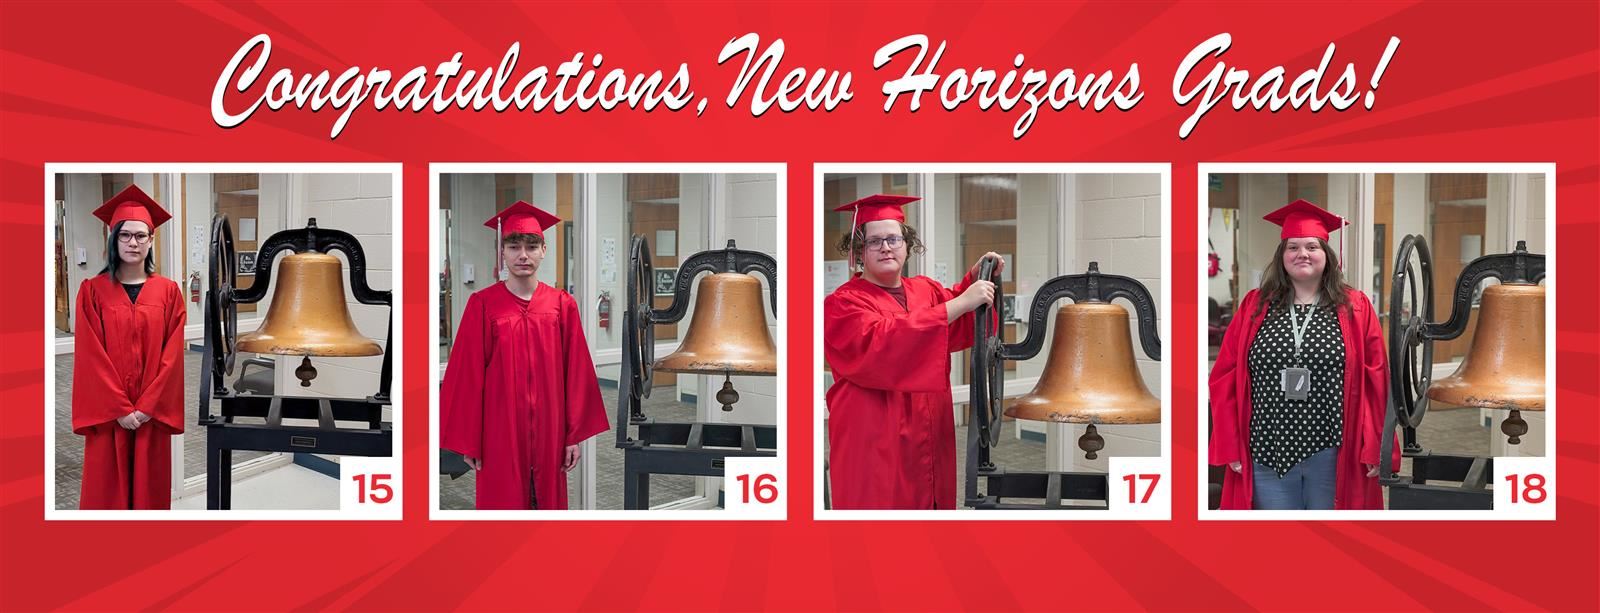 Four NHHS Graduates Ring the Bell on the Same Day